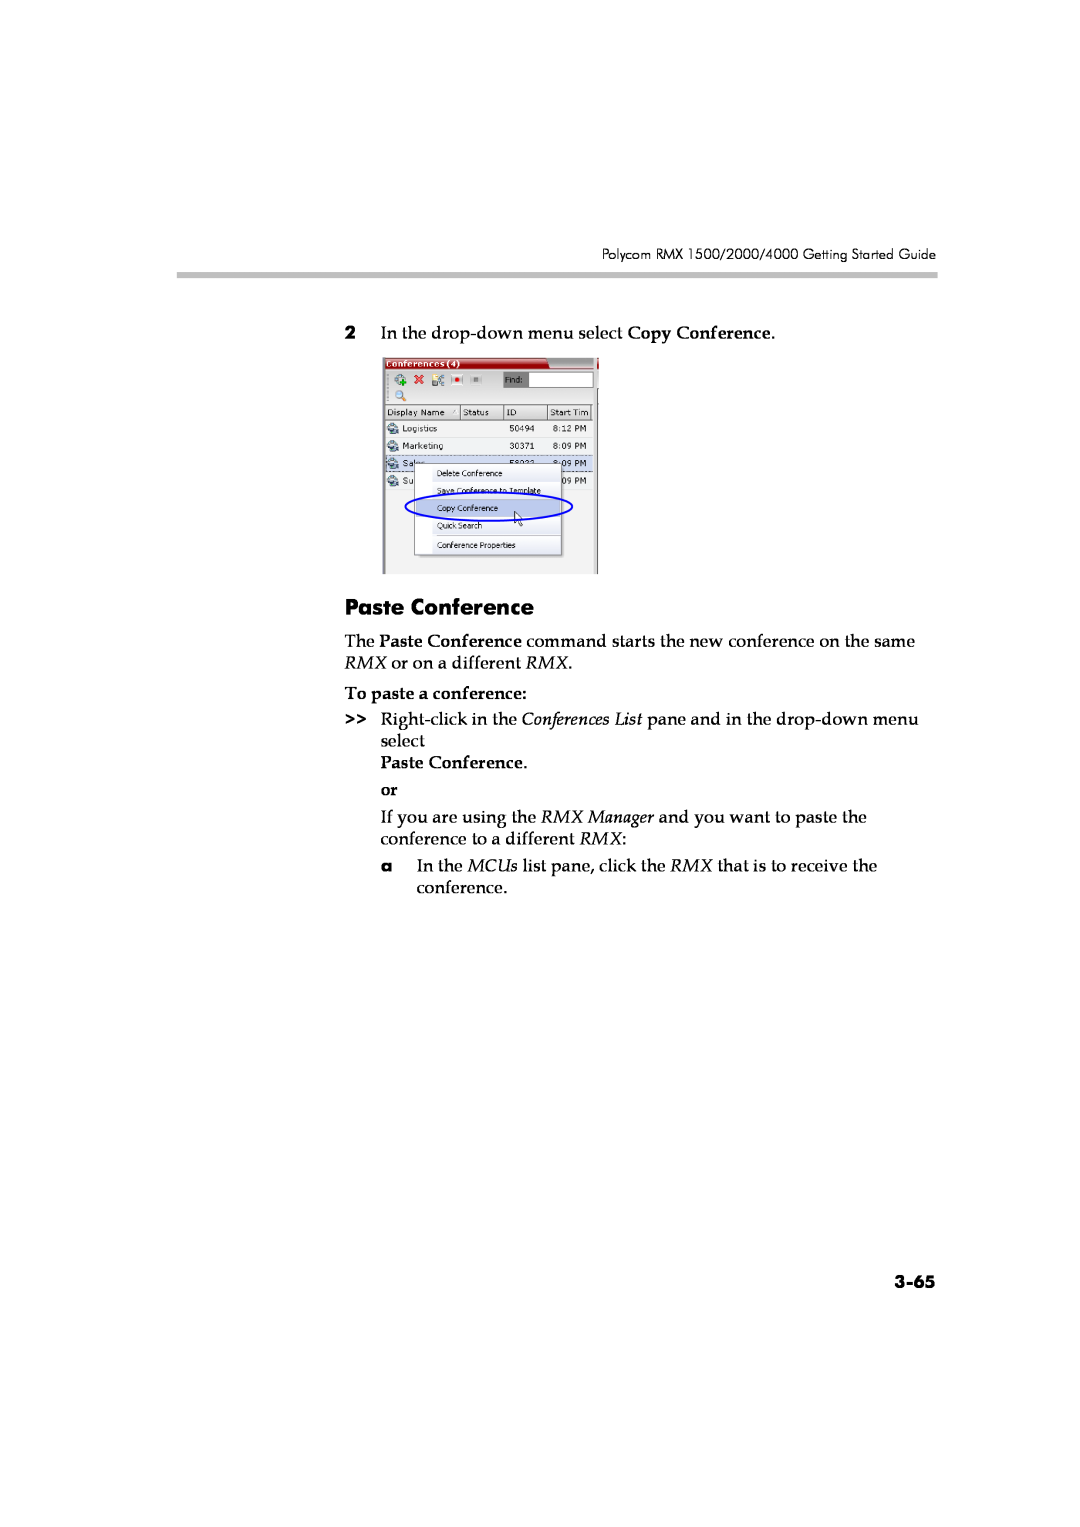 Polycom DOC2560B manual To paste a conference, Paste Conference. or, 3-65 